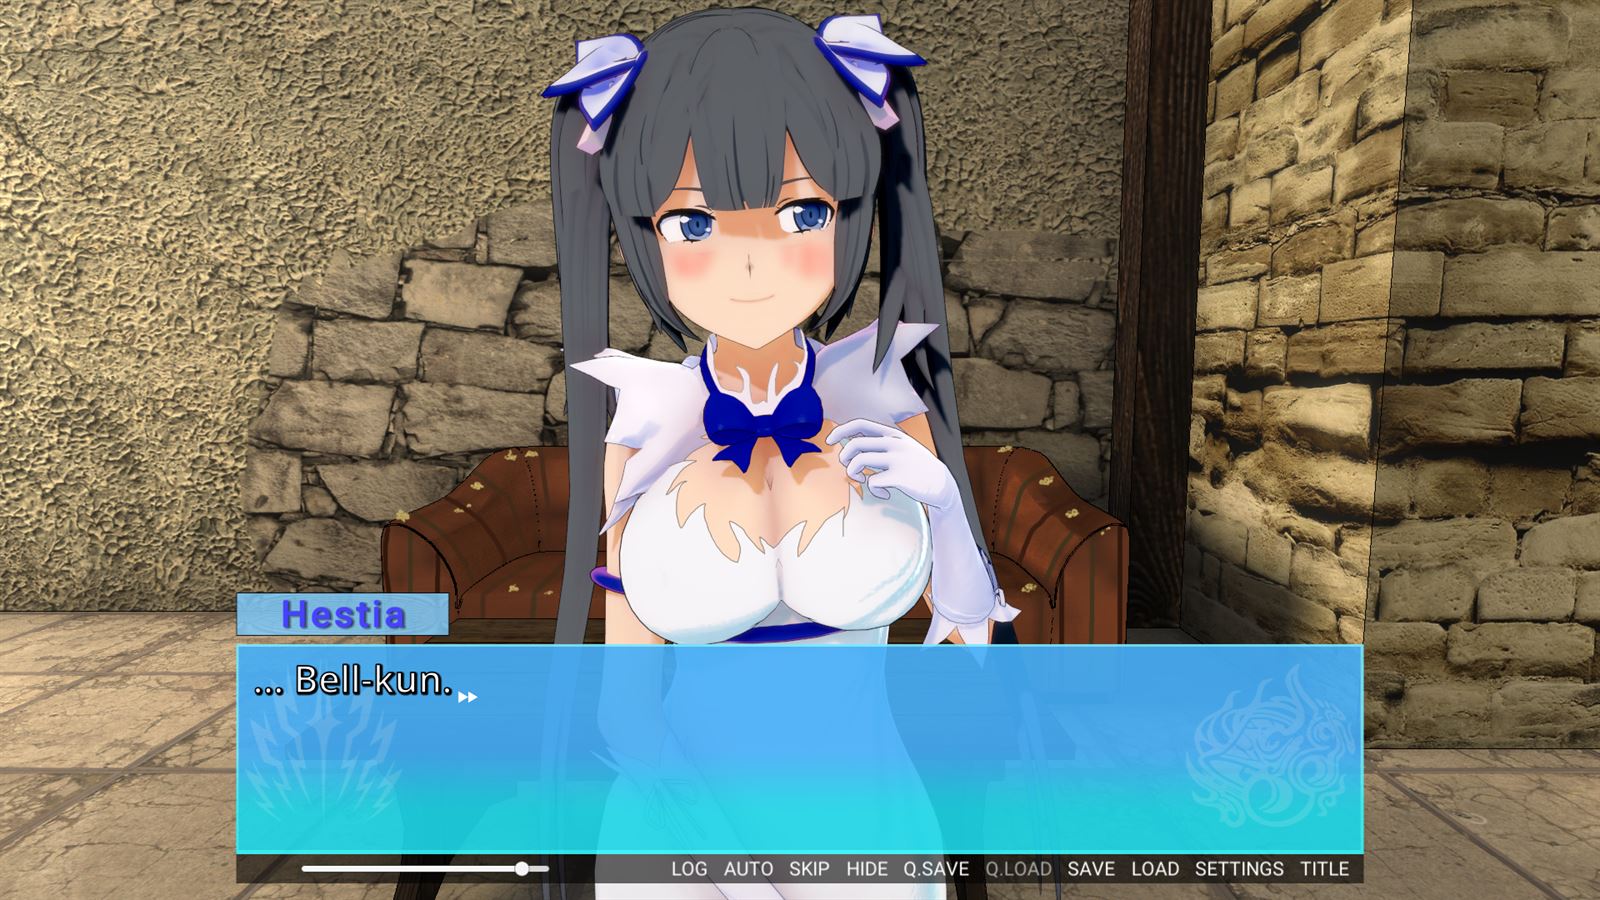 Legacy Of Hestia Unity Adult Sex Game New Version V R18 Free Download For Windows Macos Linux